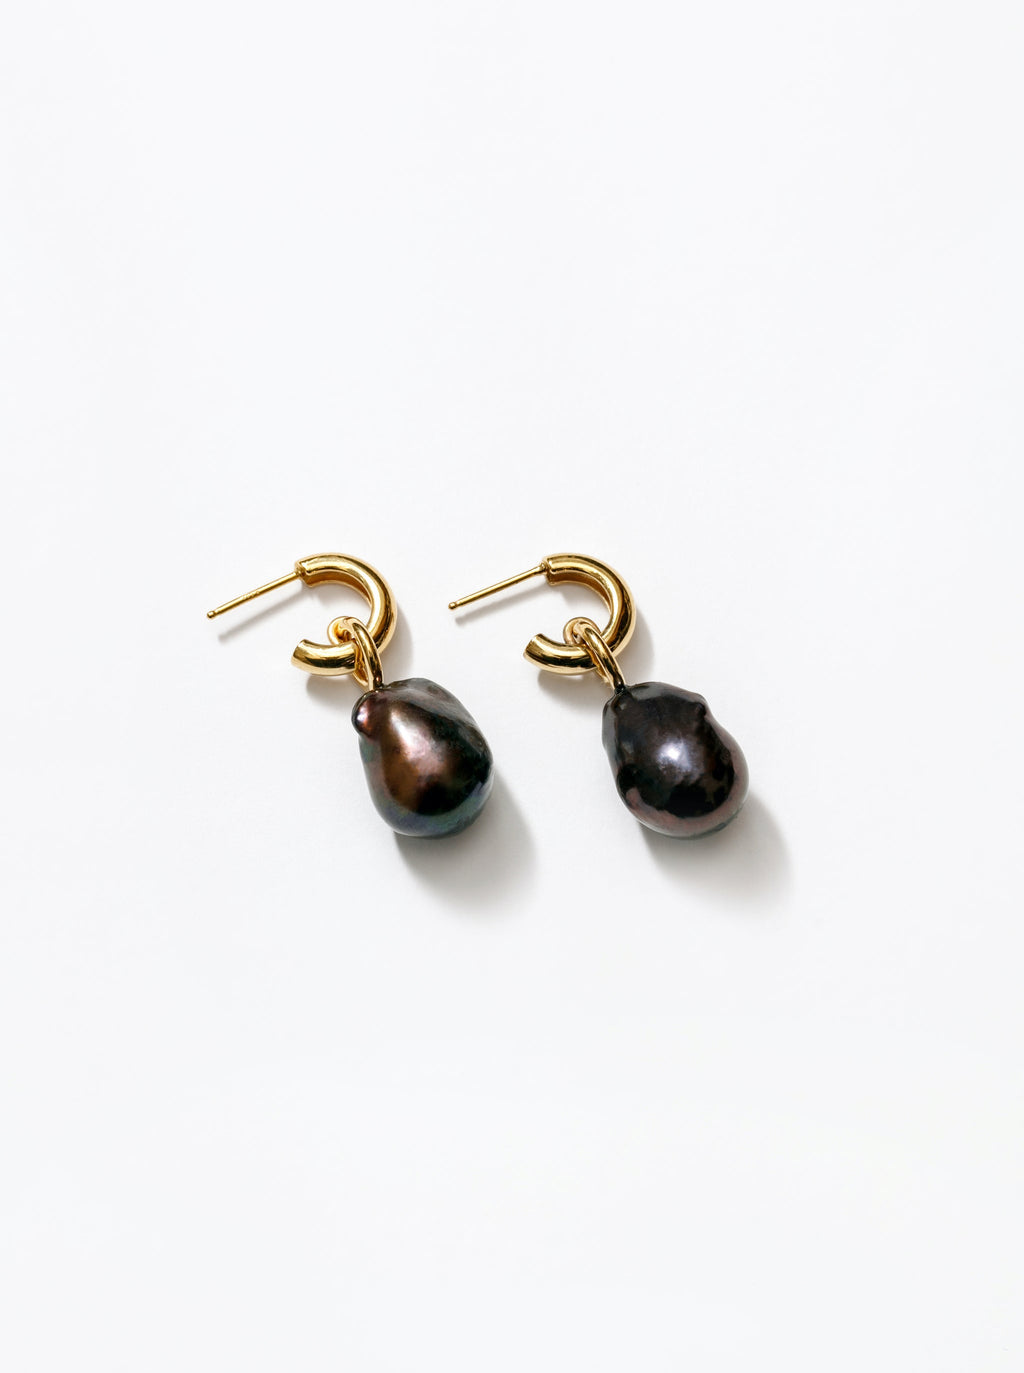 Tahitian Black Pearl Earrings in Gold with Diamonds - 9-10mm – Maui Divers  Jewelry